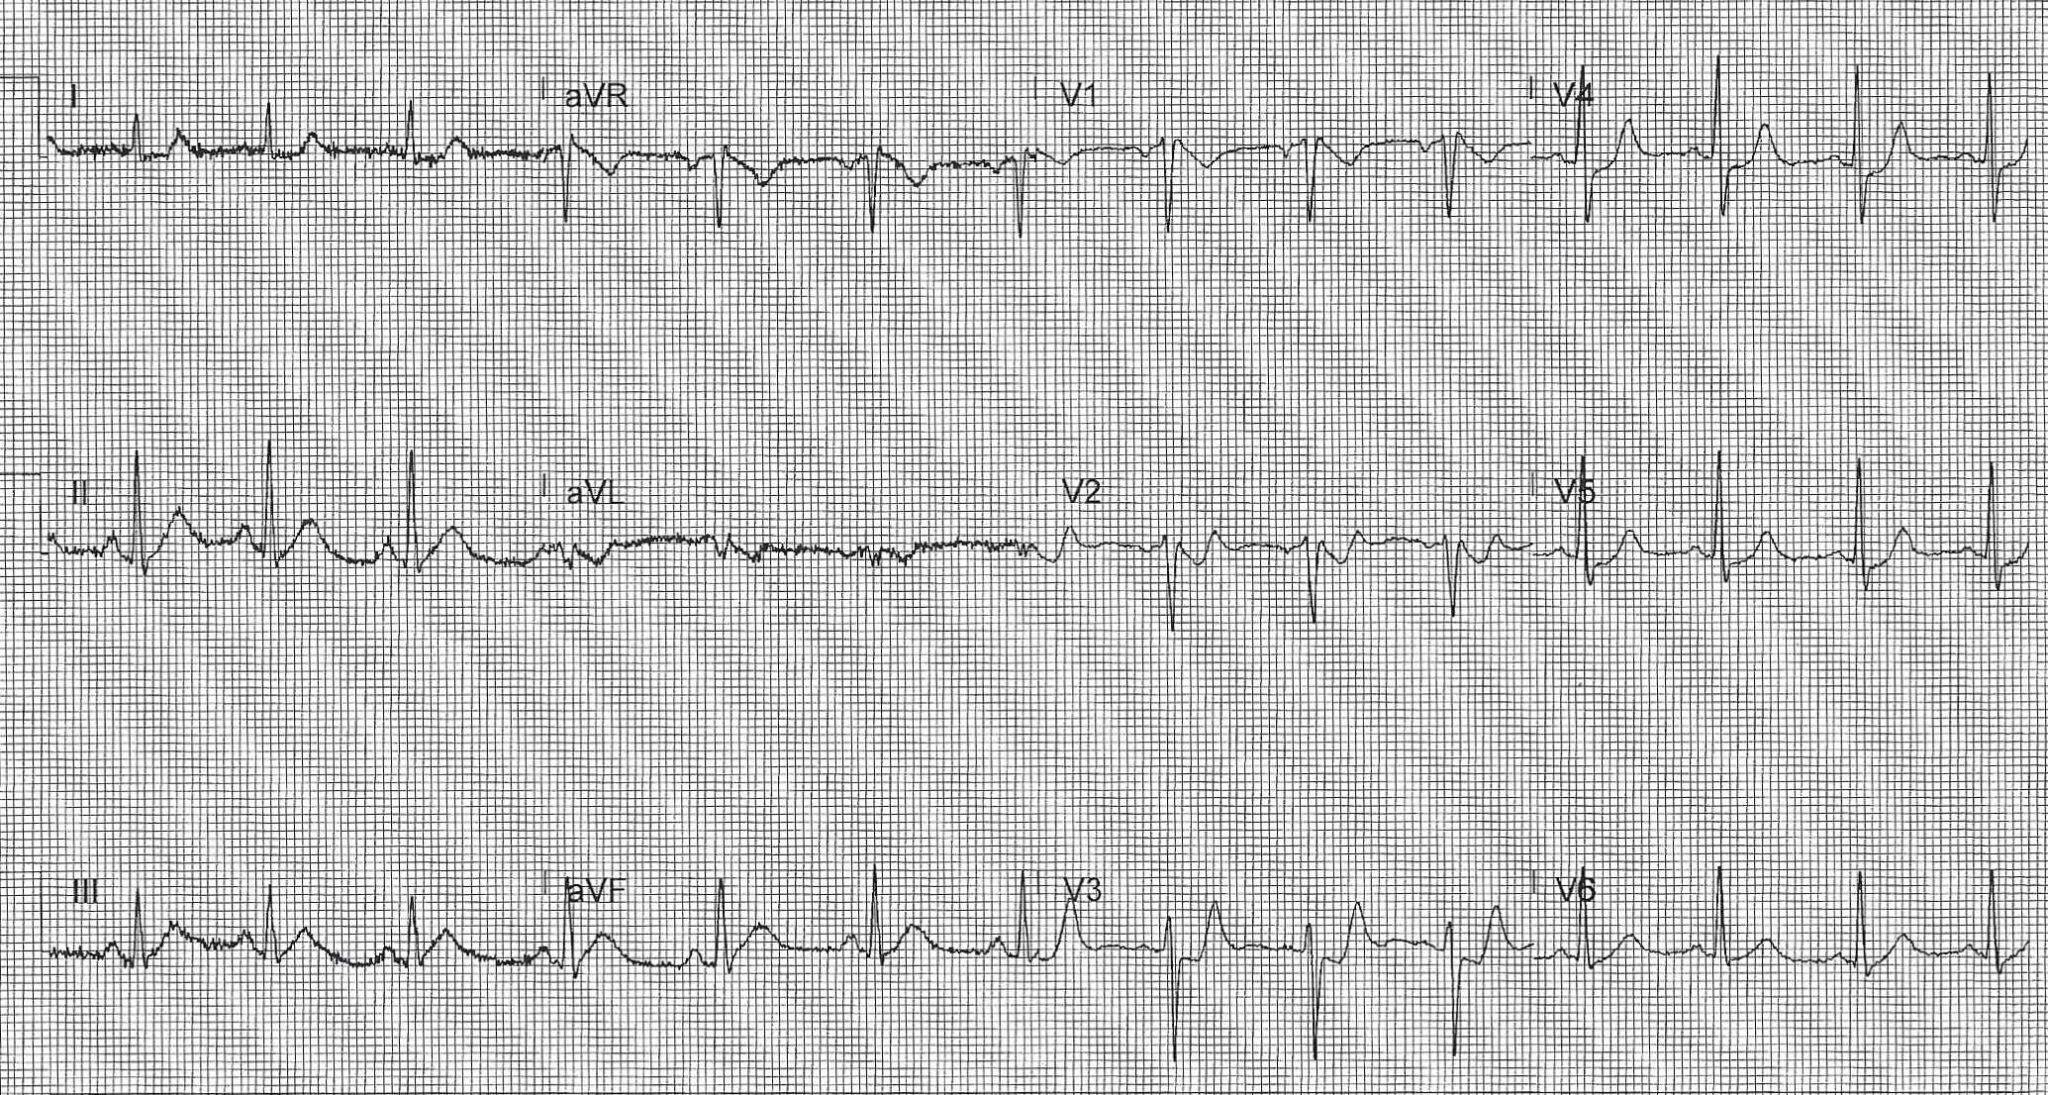 ECG computer readout of a person experiencing a heart attack. | Credit: Bardy Pregerson, MD